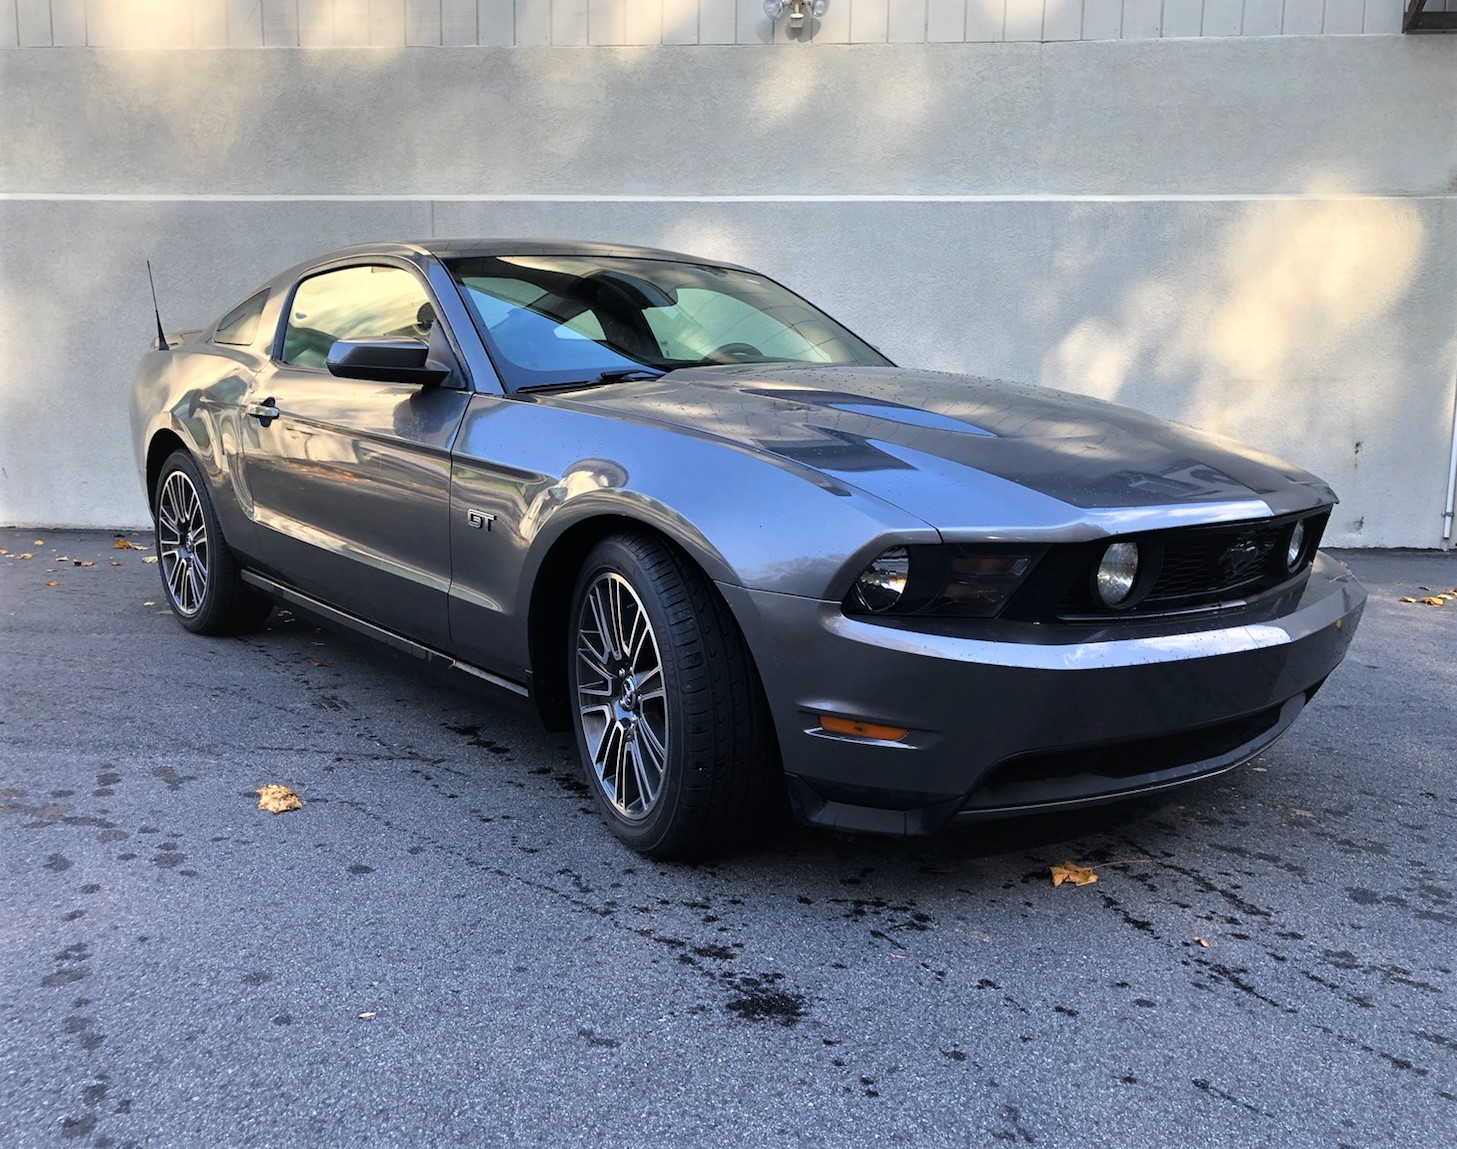 2010 Ford Mustang GT. 4.6L V8 Engine, Manual Transmission, A/C, Leather seats, Power Windows and Doors, Power Drivers Seat, Power Locks and Mirrors, Tilt, Cruise, AM/FM/CD Stereo, Sunroof, Back Up Camera, and Alloy Wheels. 